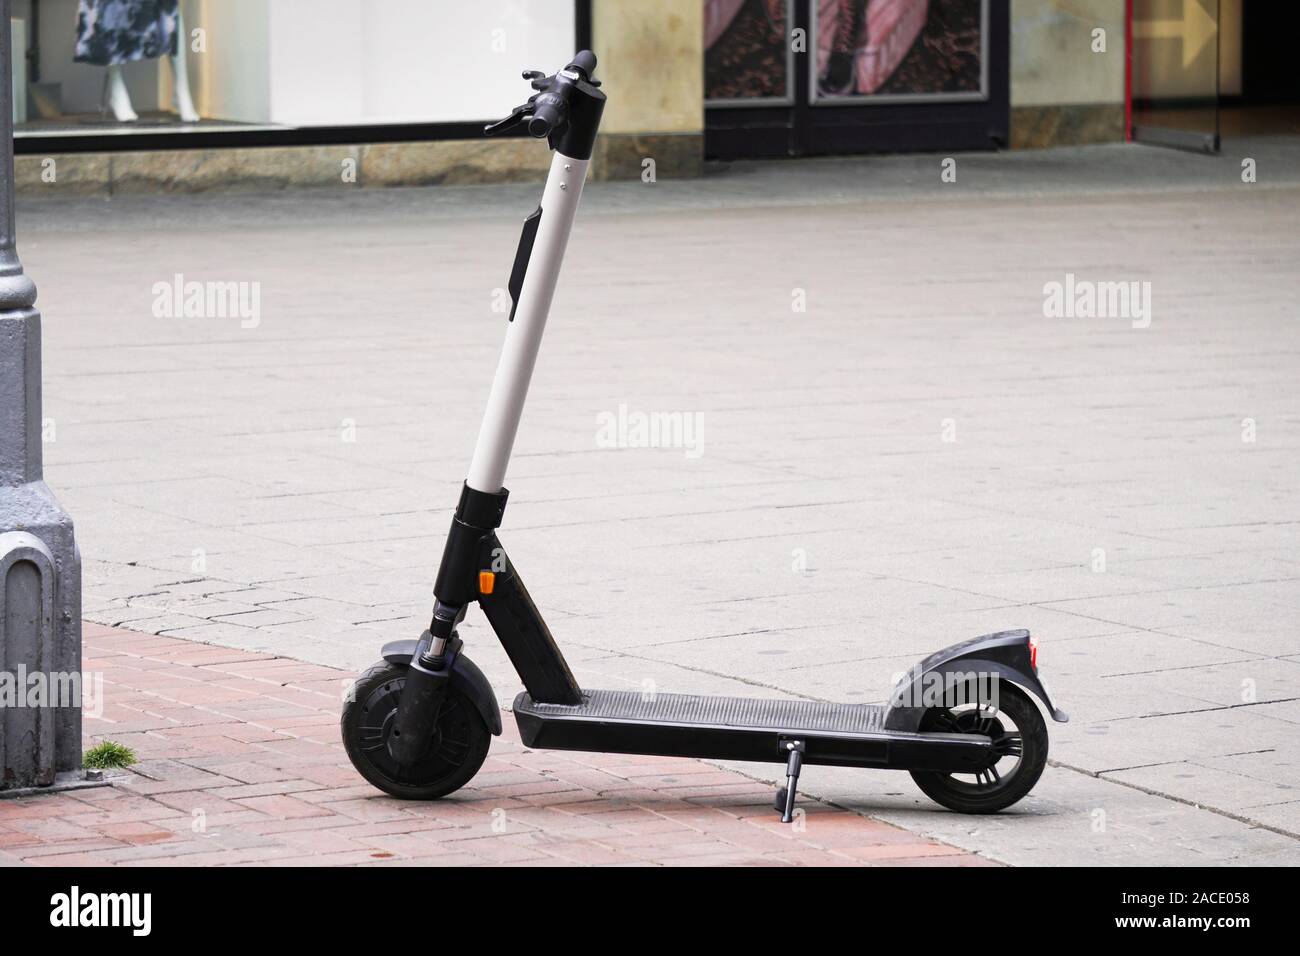 Electric scooter or e-scooter parked on pedestrian street - e-mobility or micro-mobility trend Stock Photo